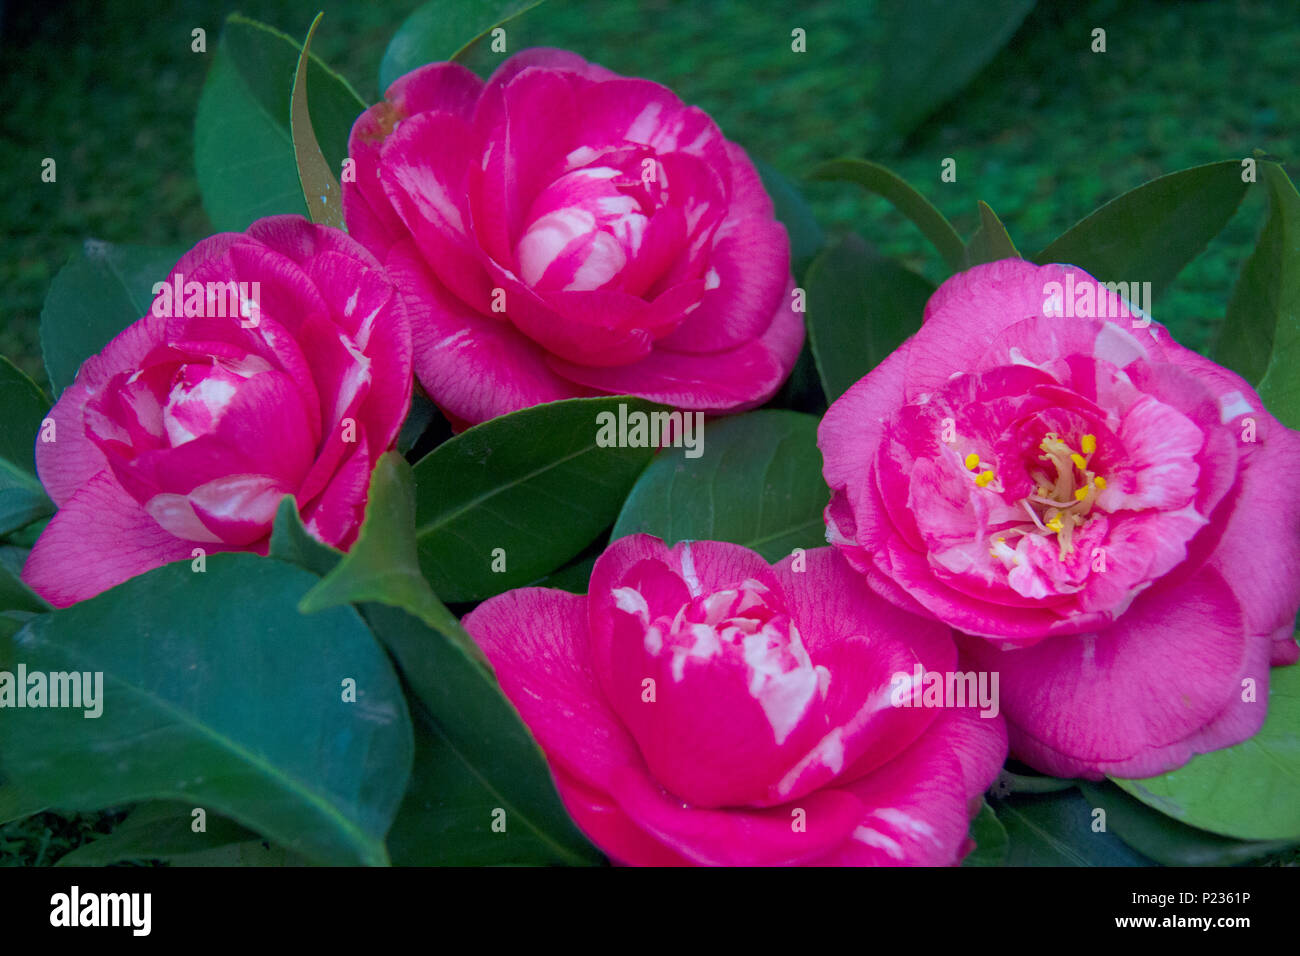 Beautiful Camellias blooming with dark green leaves. Stock Photo